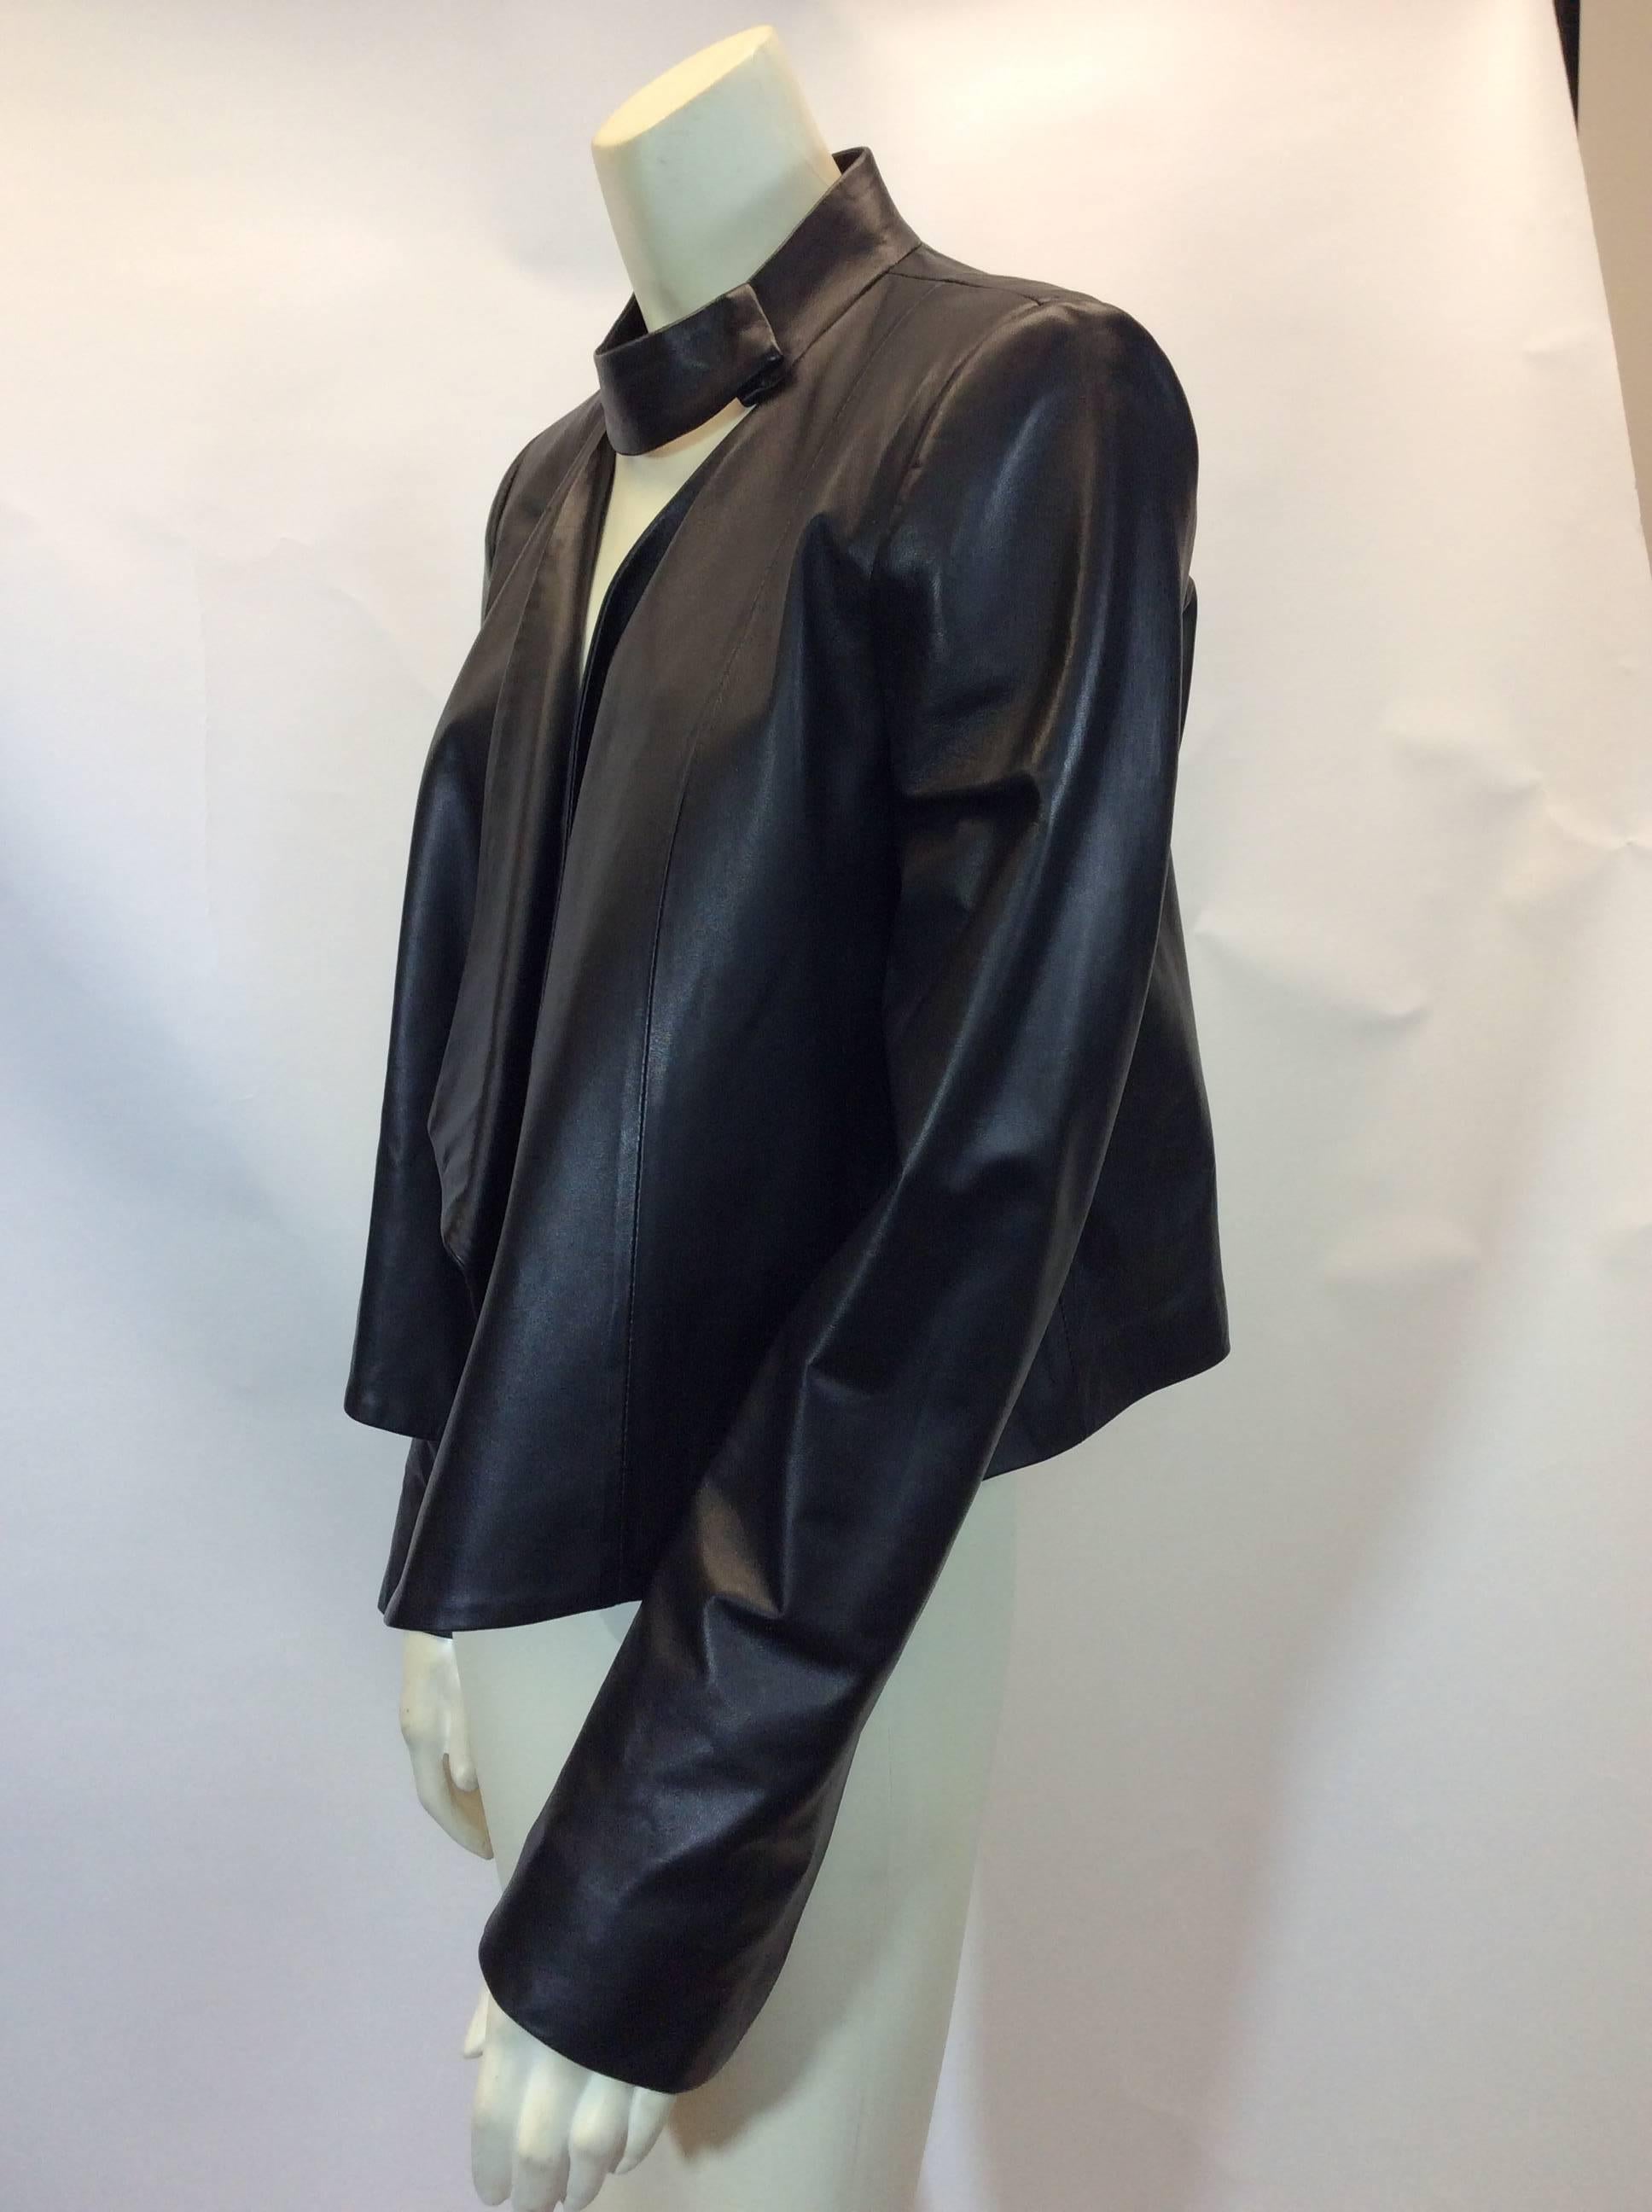 Intermix Black Leather Cropped Jacket In Excellent Condition For Sale In Narberth, PA